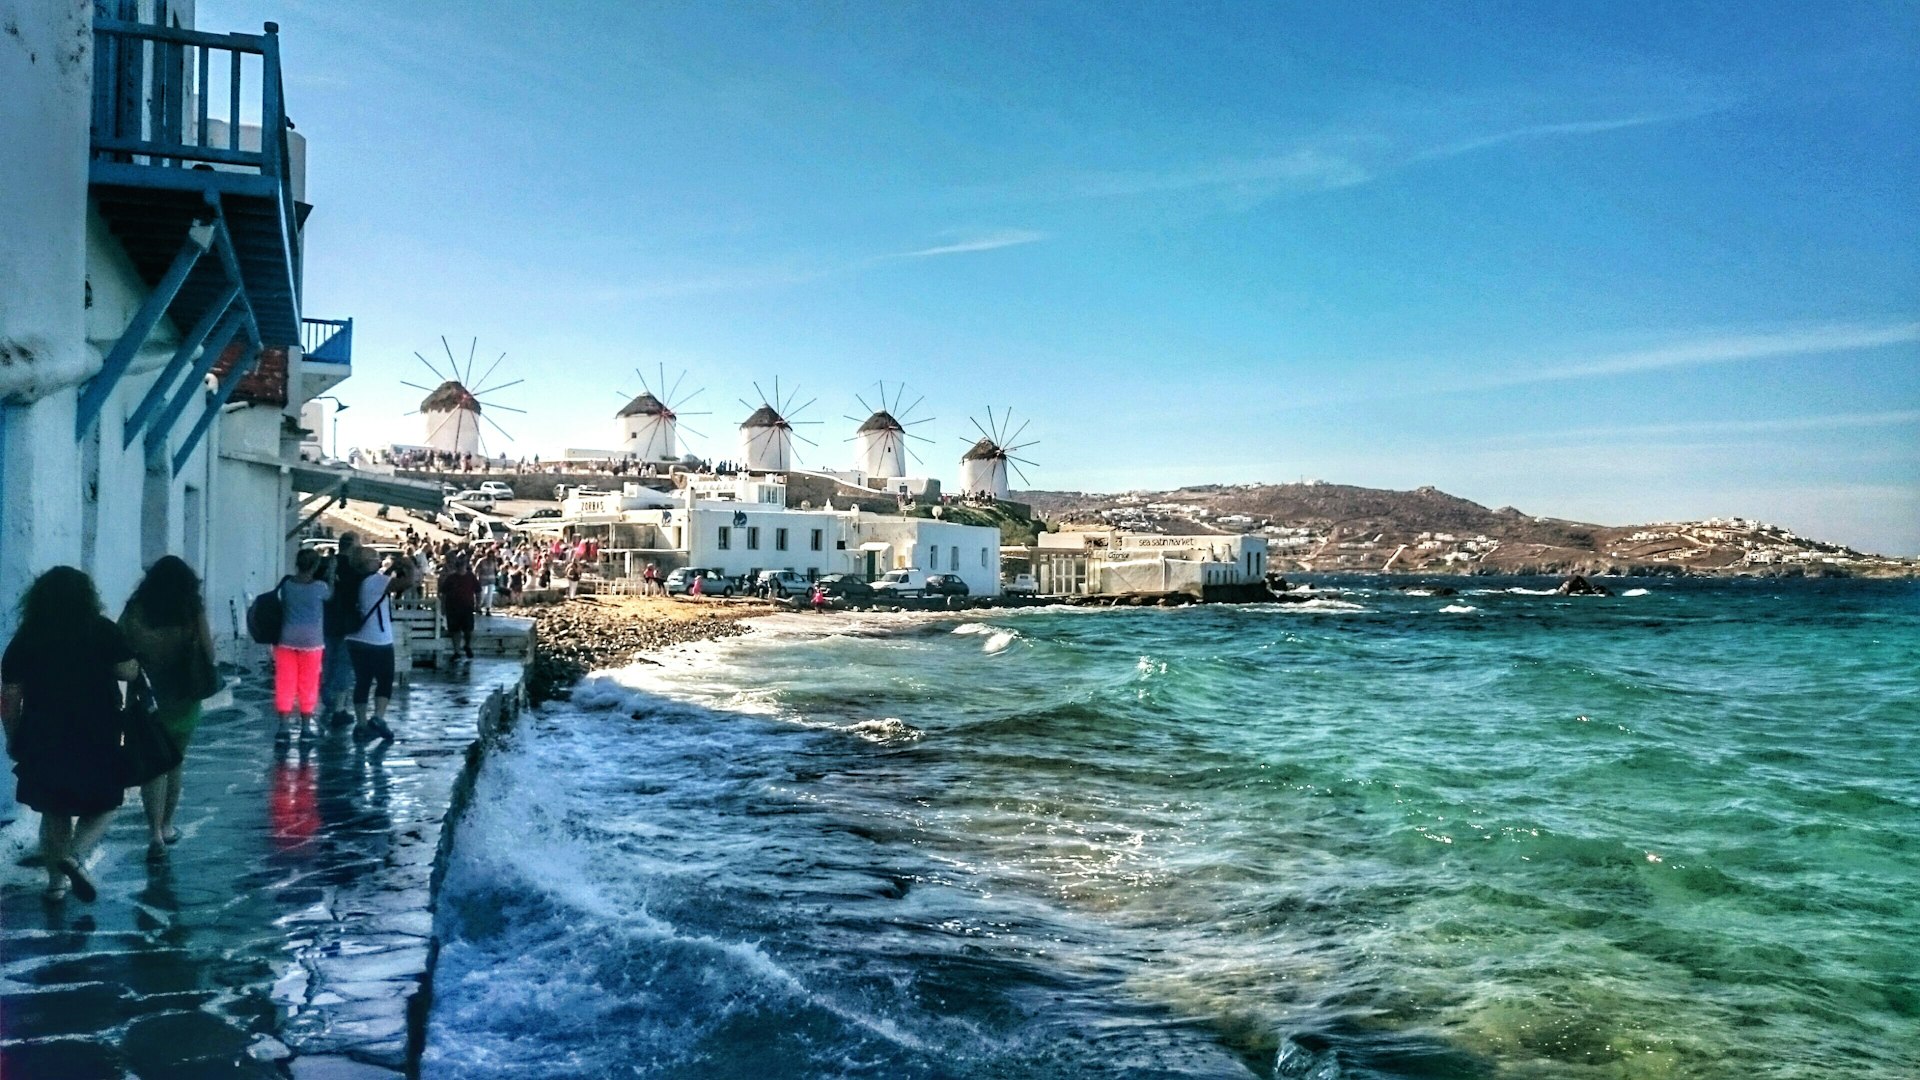 A scenic view of the windmills on Mykonos against a blue sky